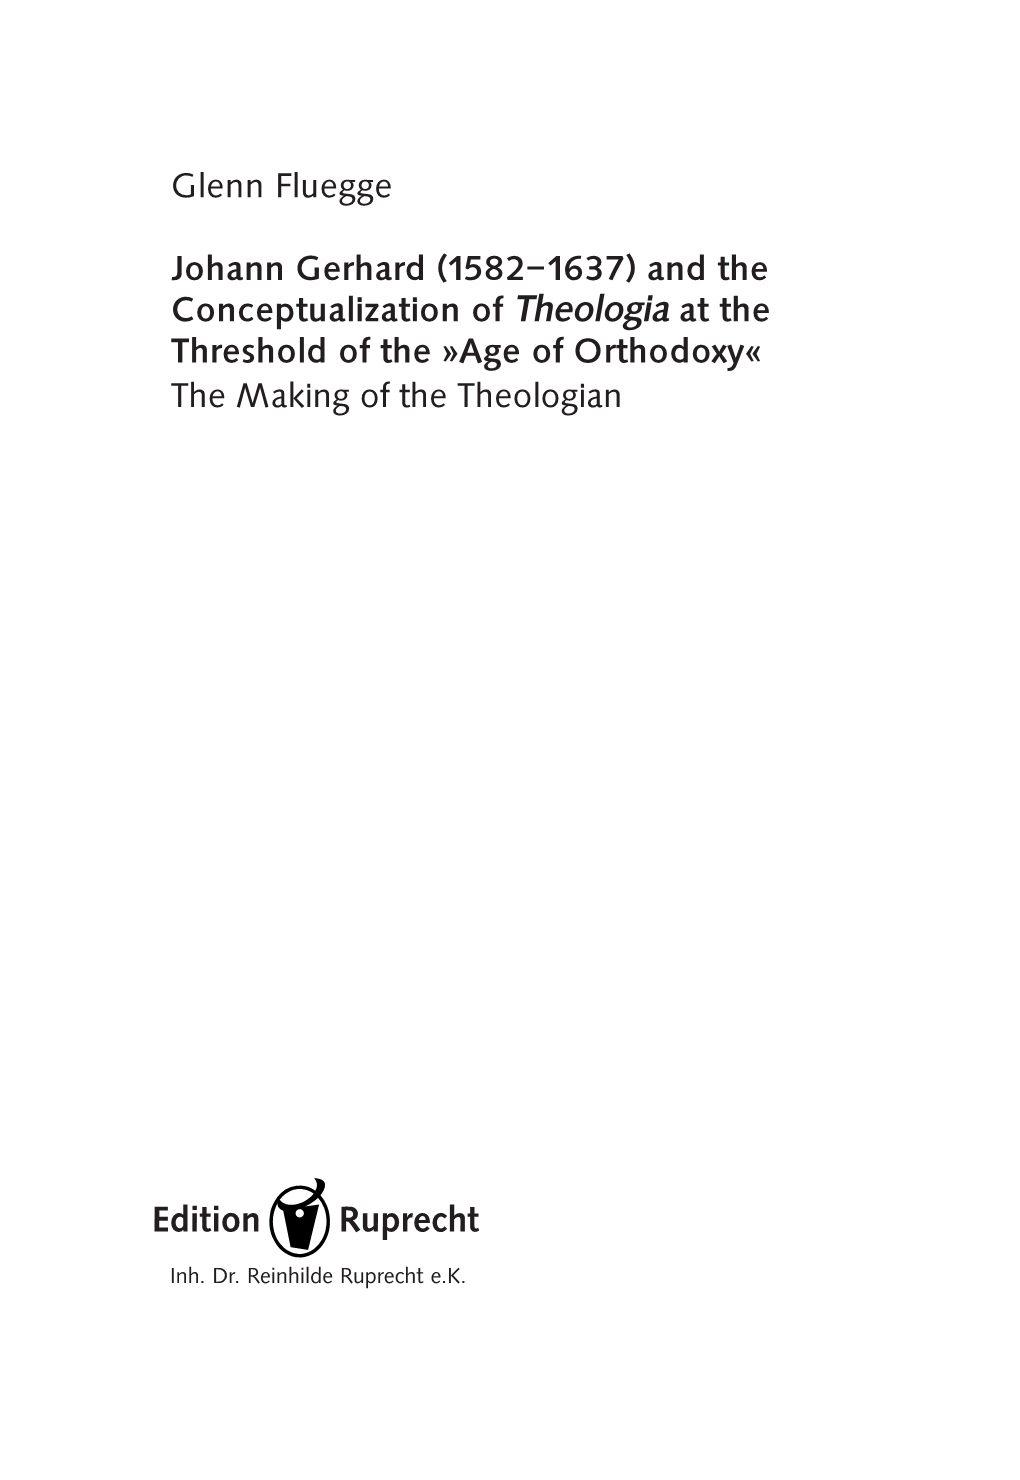 Johann Gerhard (1582–1637) and the Conceptualization of Theologia at the Threshold of the »Age of Orthodoxy« the Making of the Theologian